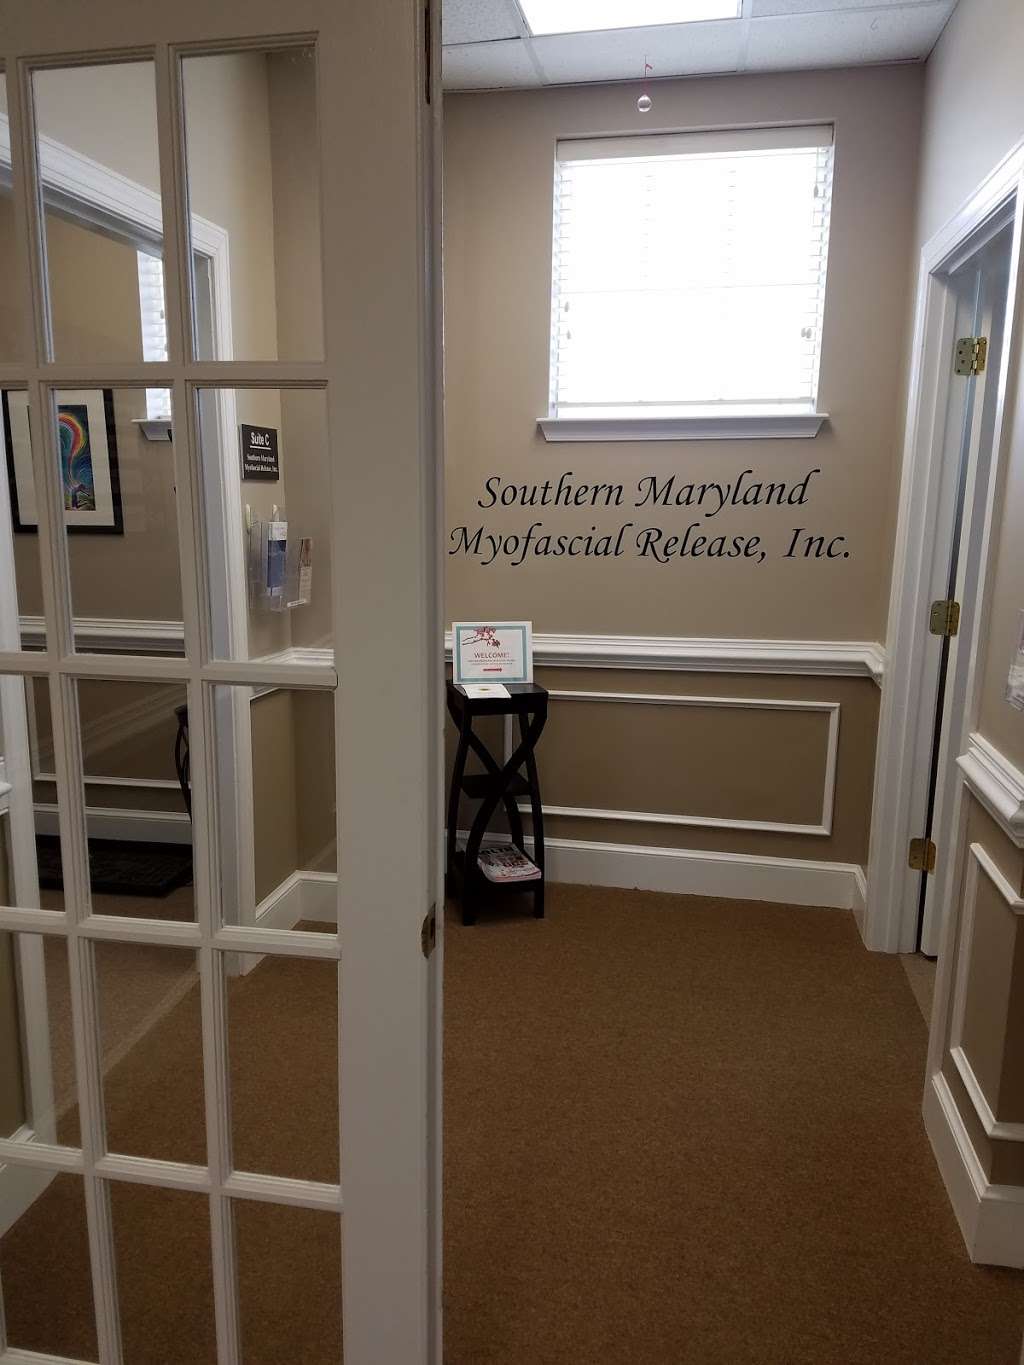 Southern Maryland Myofascial Release, Inc. | 90 Holiday Drive, Suites C&D1, Solomons, MD 20688 | Phone: (410) 449-6682